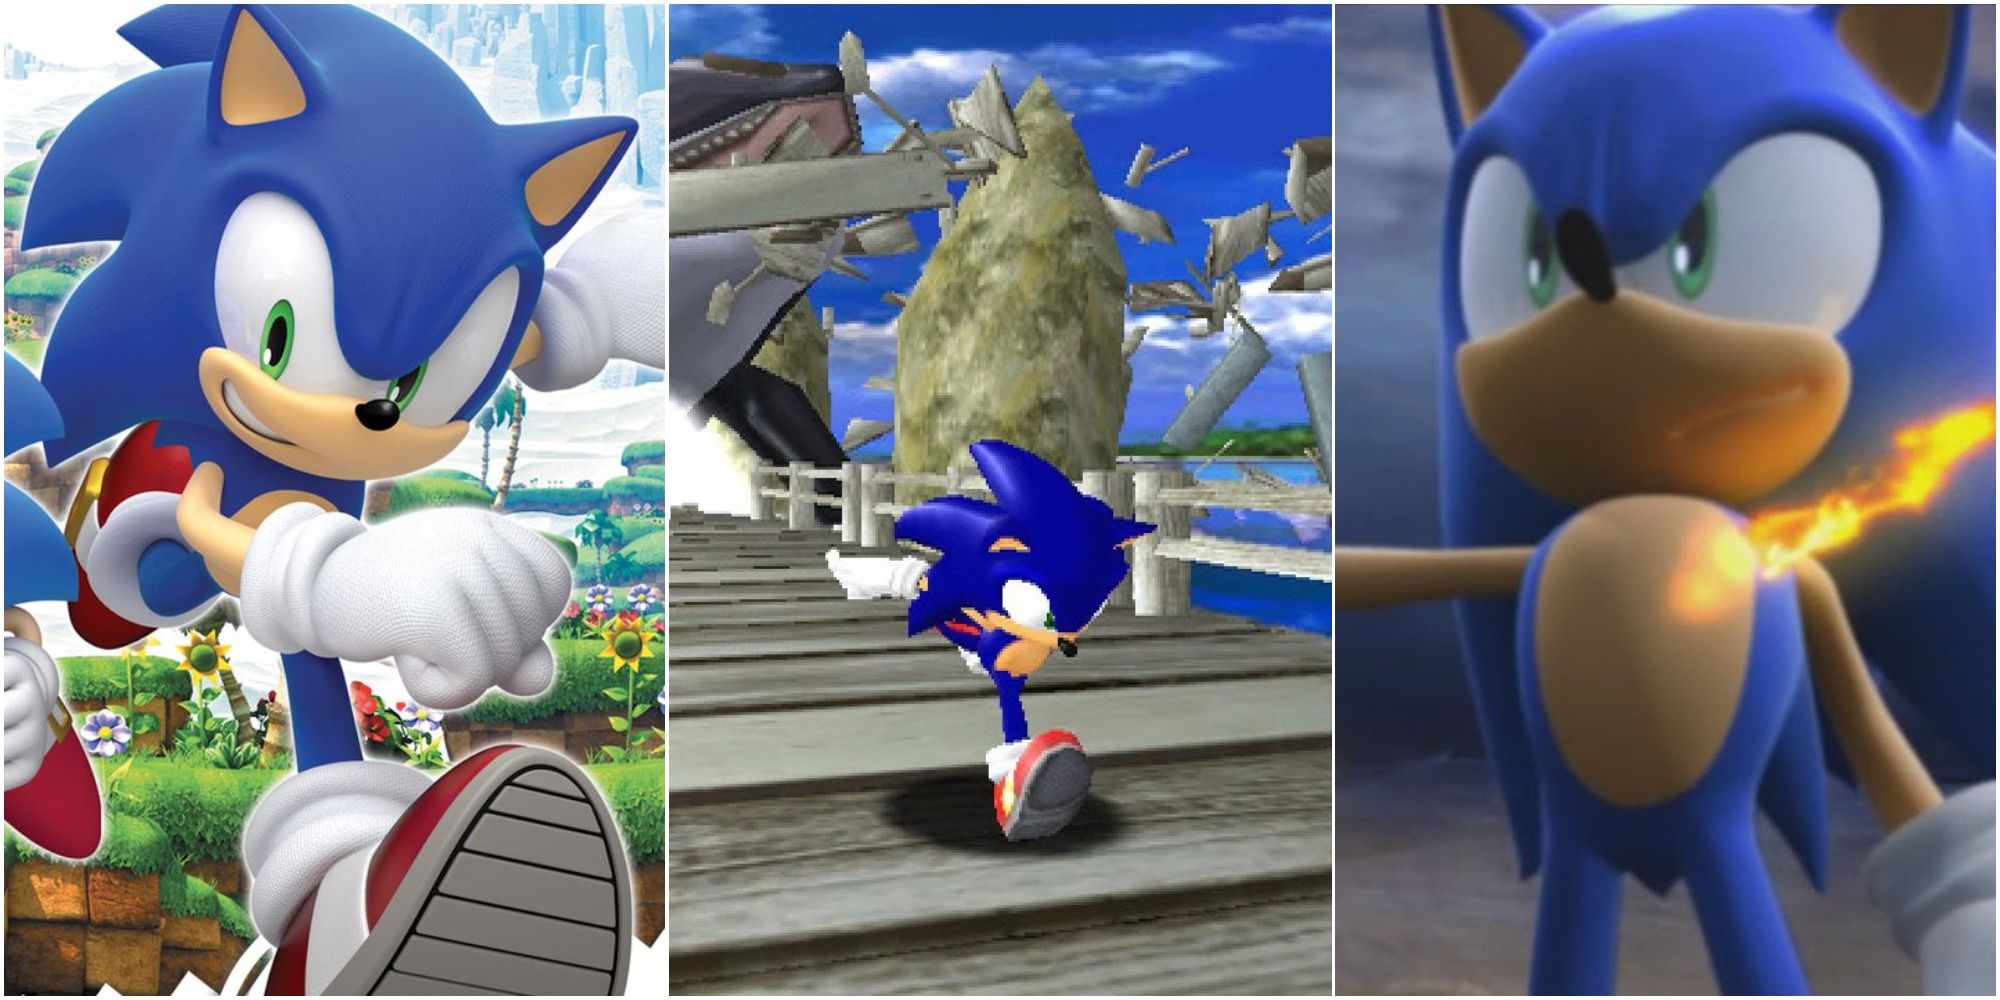 Best Sonic games ranked - the games to play before Sonic